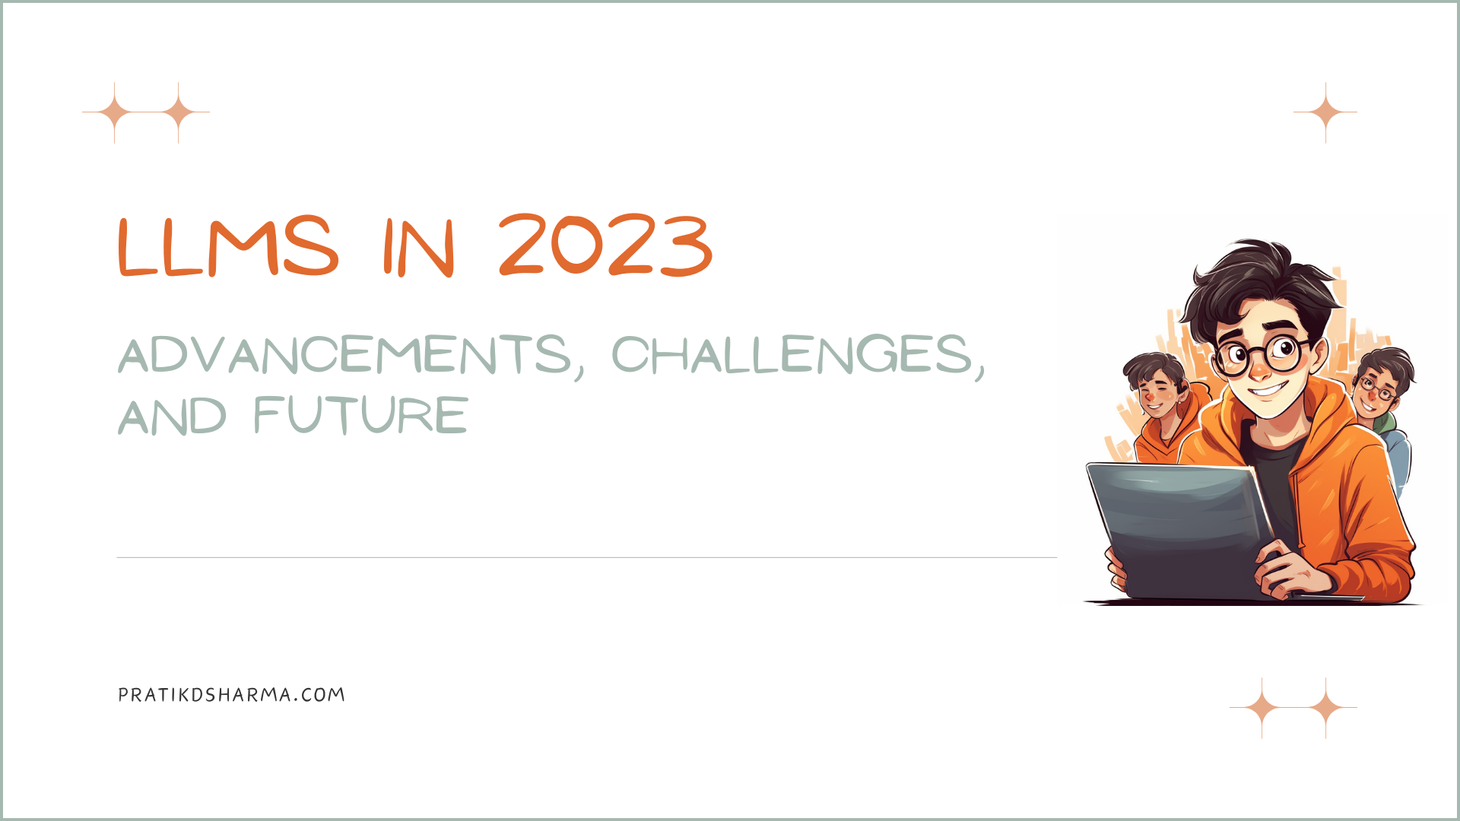 LLMs in 2023: Advancements, Challenges, and Future.